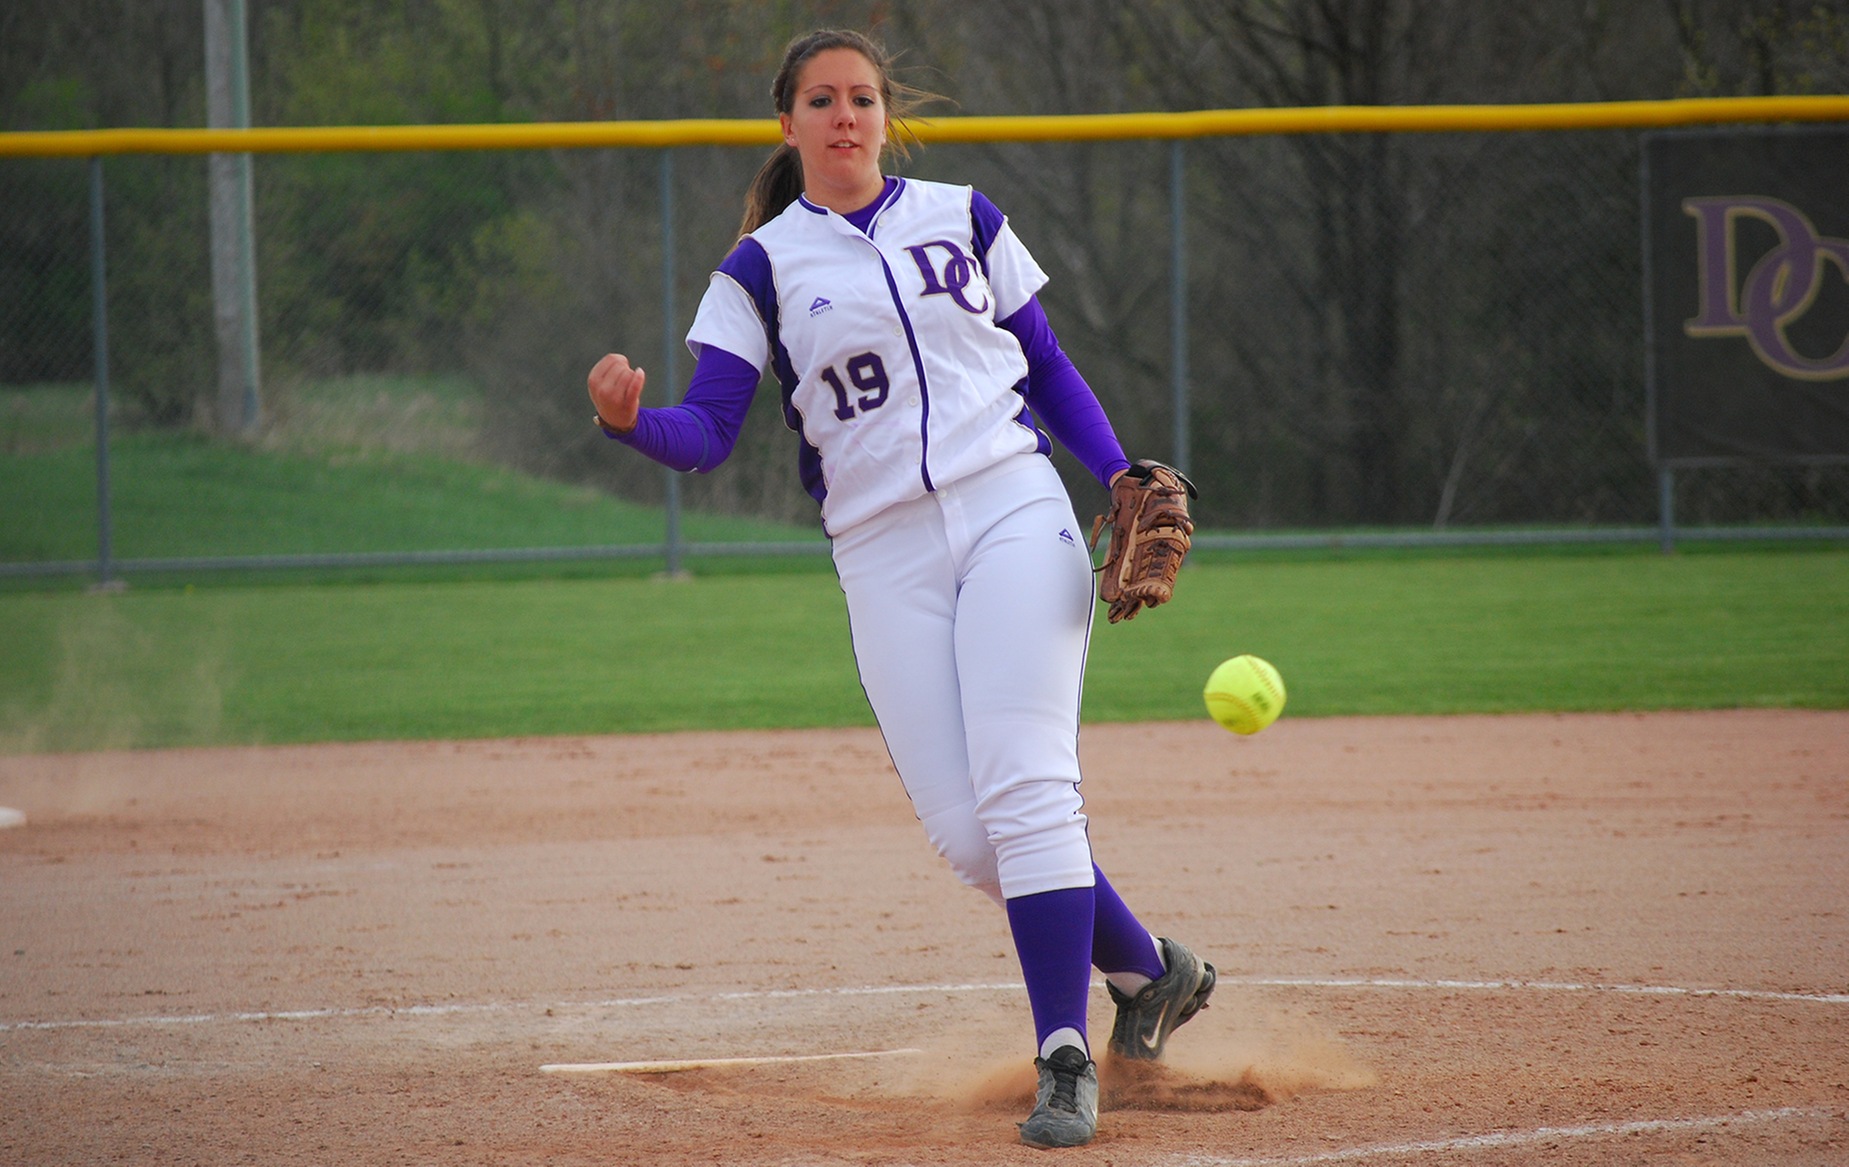 Bowers Honored by HCAC as Pitcher of the Week